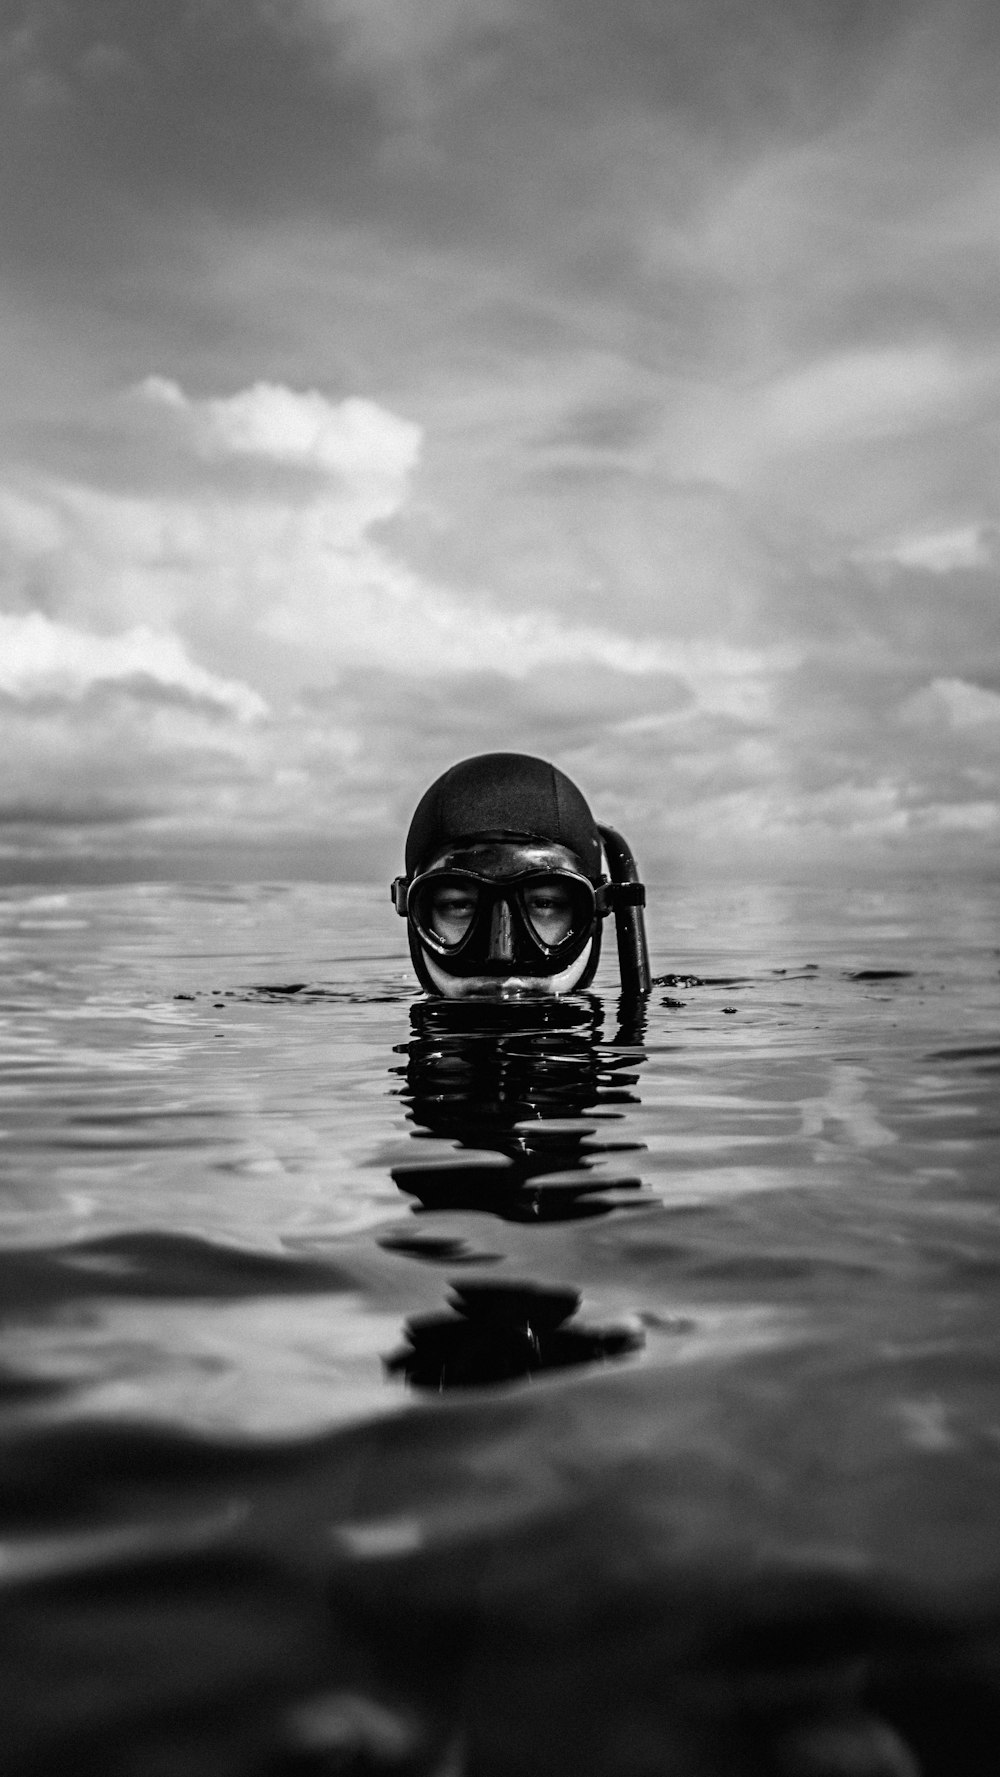 grayscale photo of person wearing goggles on water